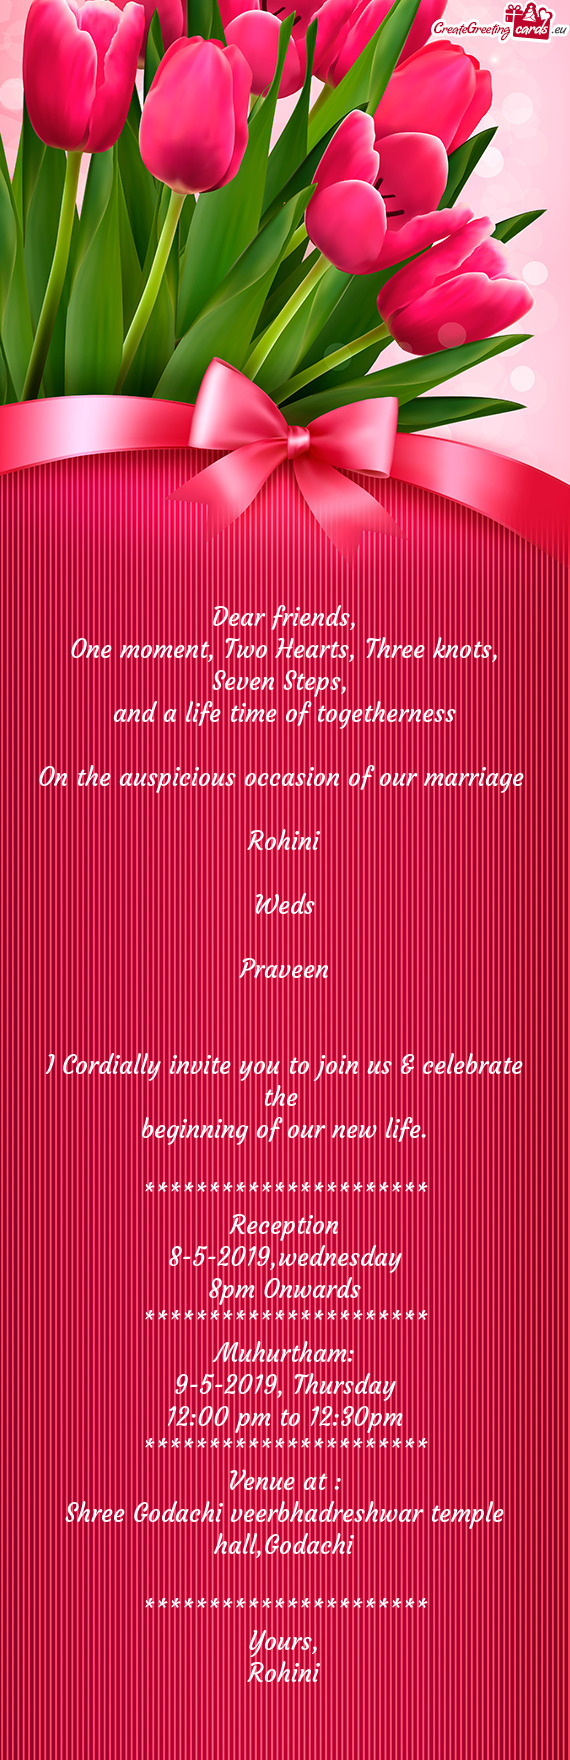 Praveen
 
 
 I Cordially invite you to join us & celebrate the 
 beginning of our new life